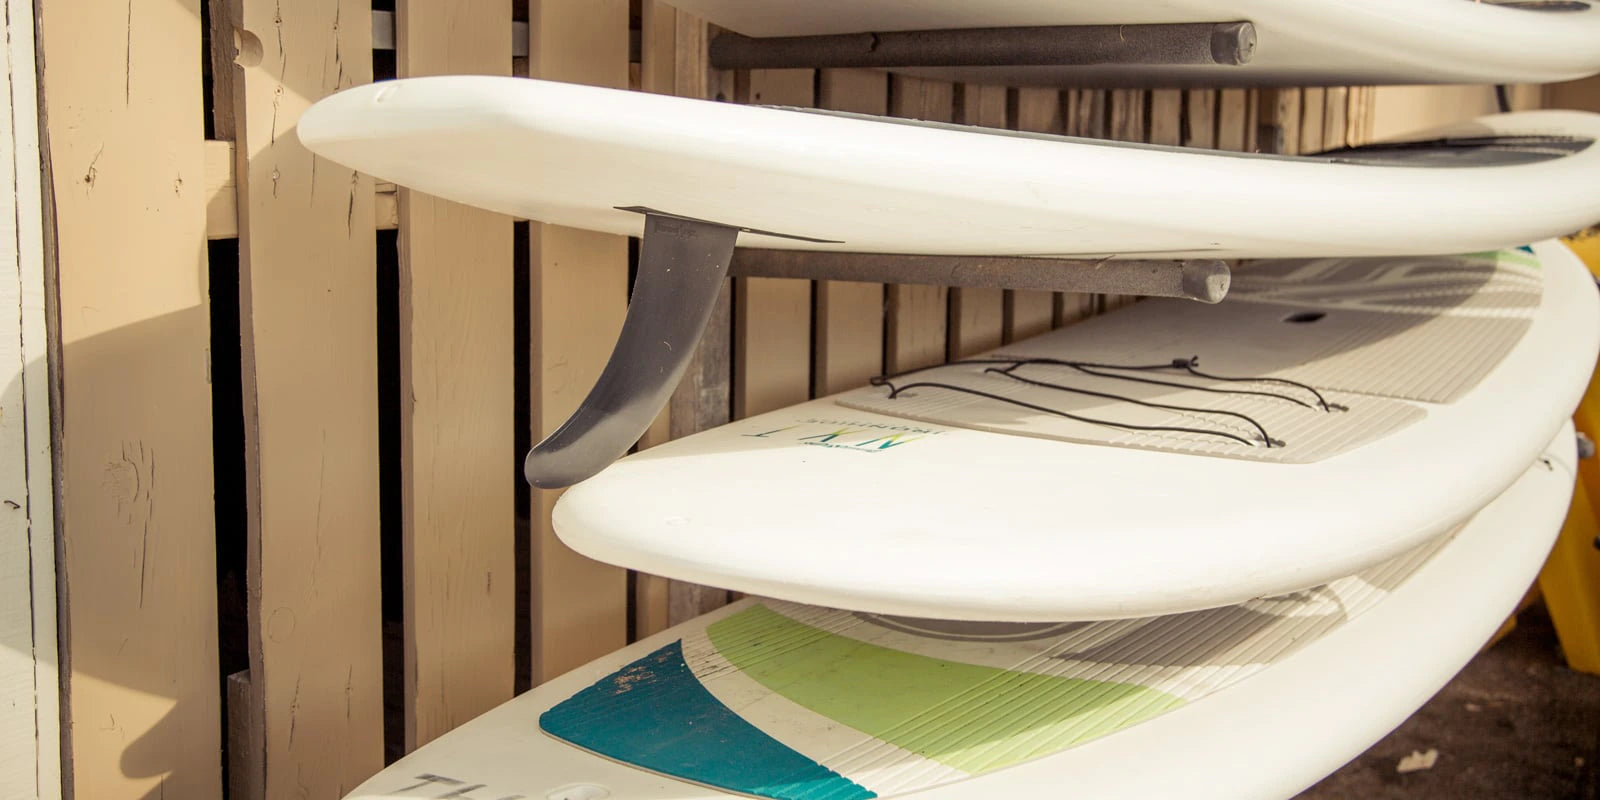 About the Store of Stand Up Paddle Board